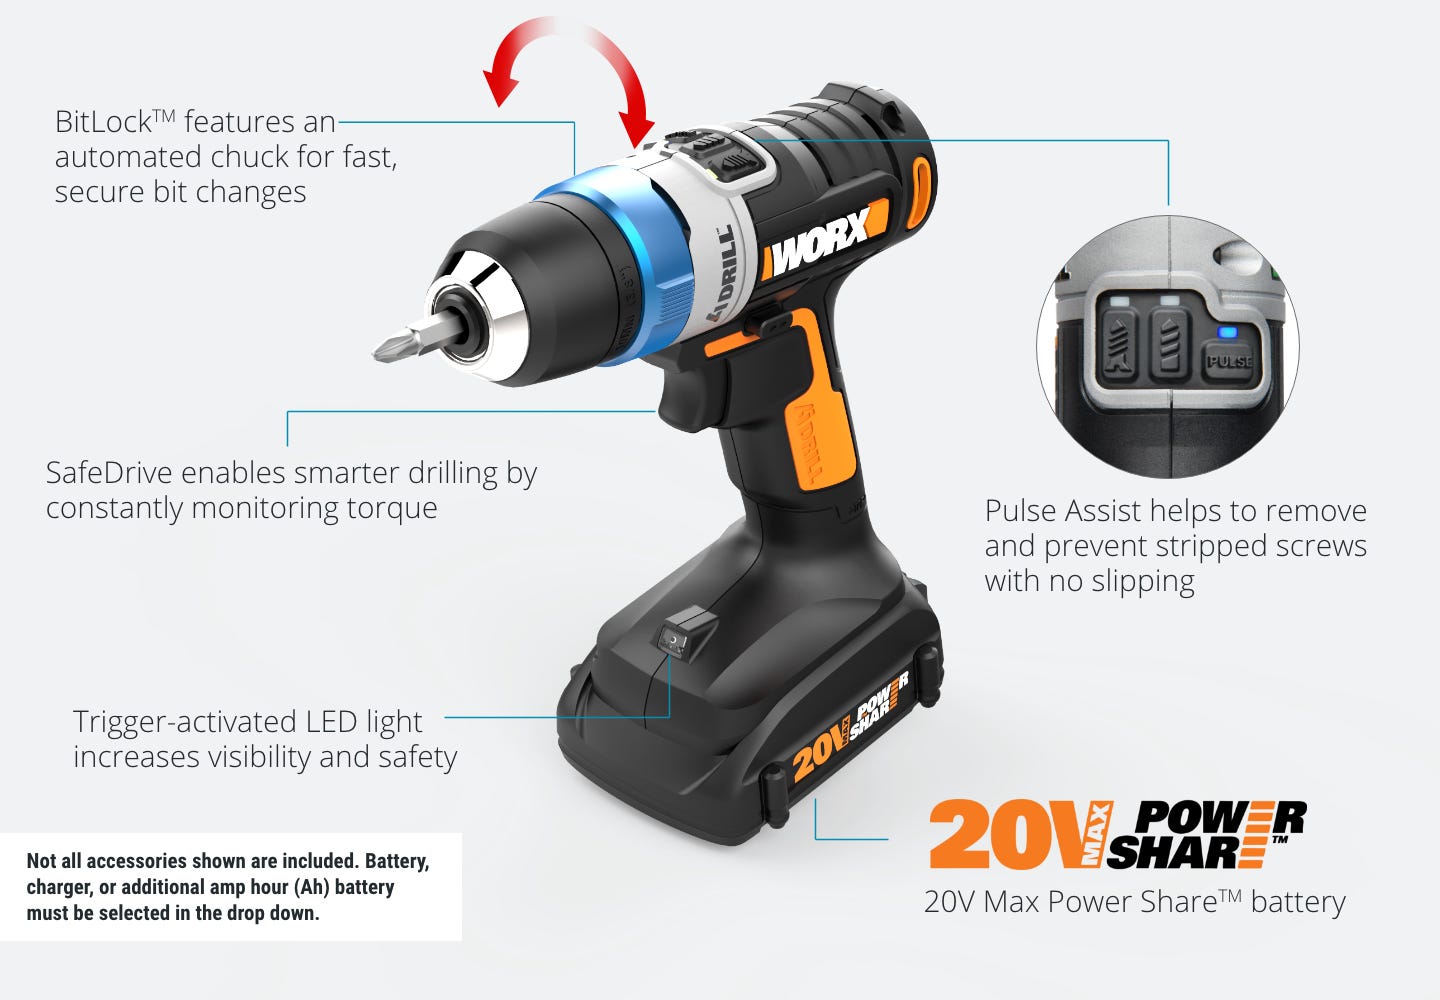 Get to know the 20v AI Drill WX178l - Bitlock features an automated chuck for fast bit changes, Safedrive enables smarter drilling by constantly monitoring torque, trigger-activated led light, pulse assitant helps to remove and prevent stripped screws